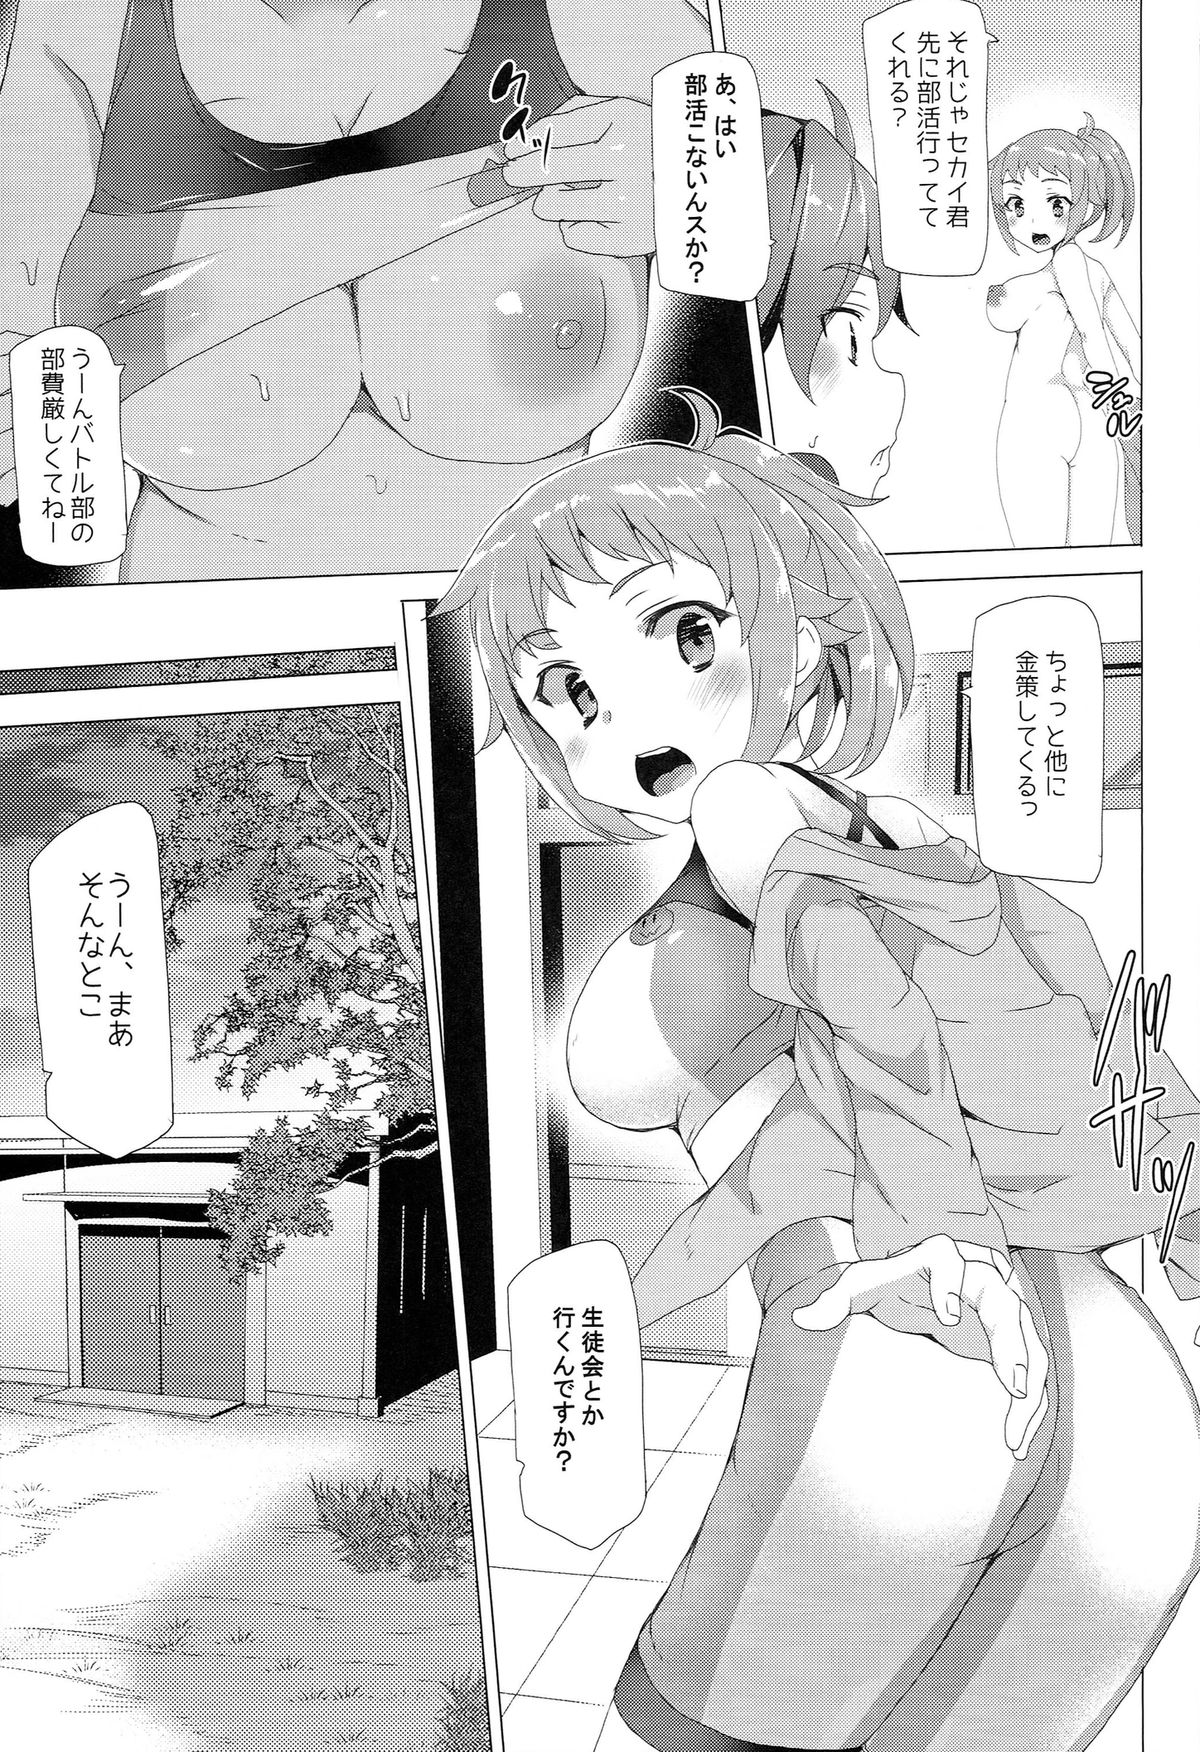 [Waffle Doumeiken (Tanaka Decilitre)] Yariman Bitch Fighters (Gundam Build Fighters Try) page 17 full